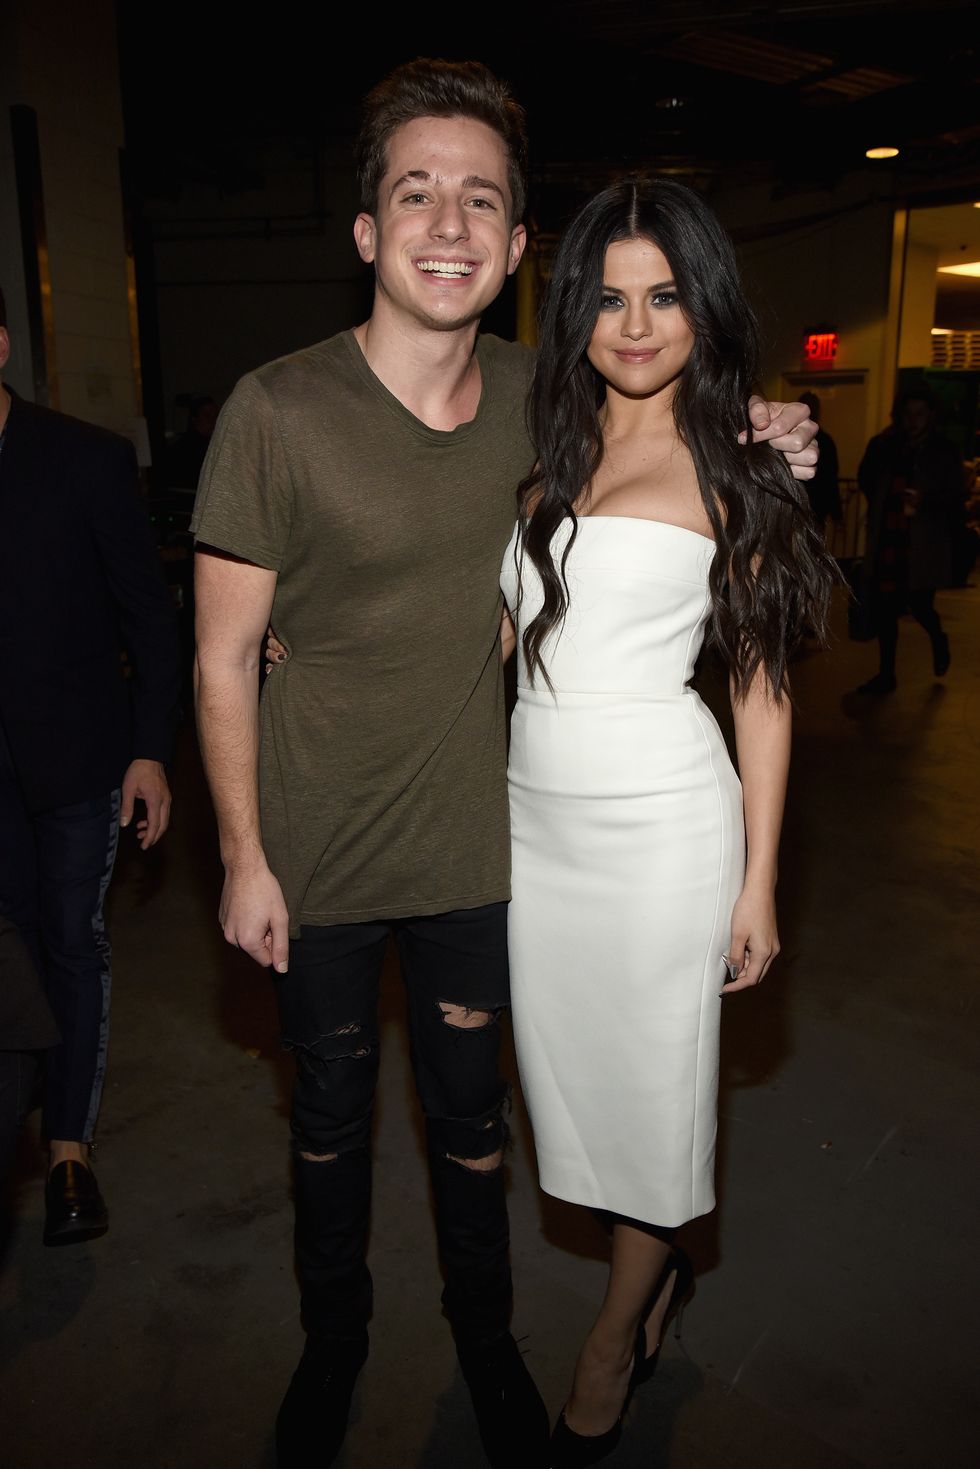 new york, ny   december 11  singers charlie puth l and selen gomez attend z100s jingle ball 2015 at madison square garden on december 11, 2015 in new york city  photo by kevin mazurgetty images for iheartmedia